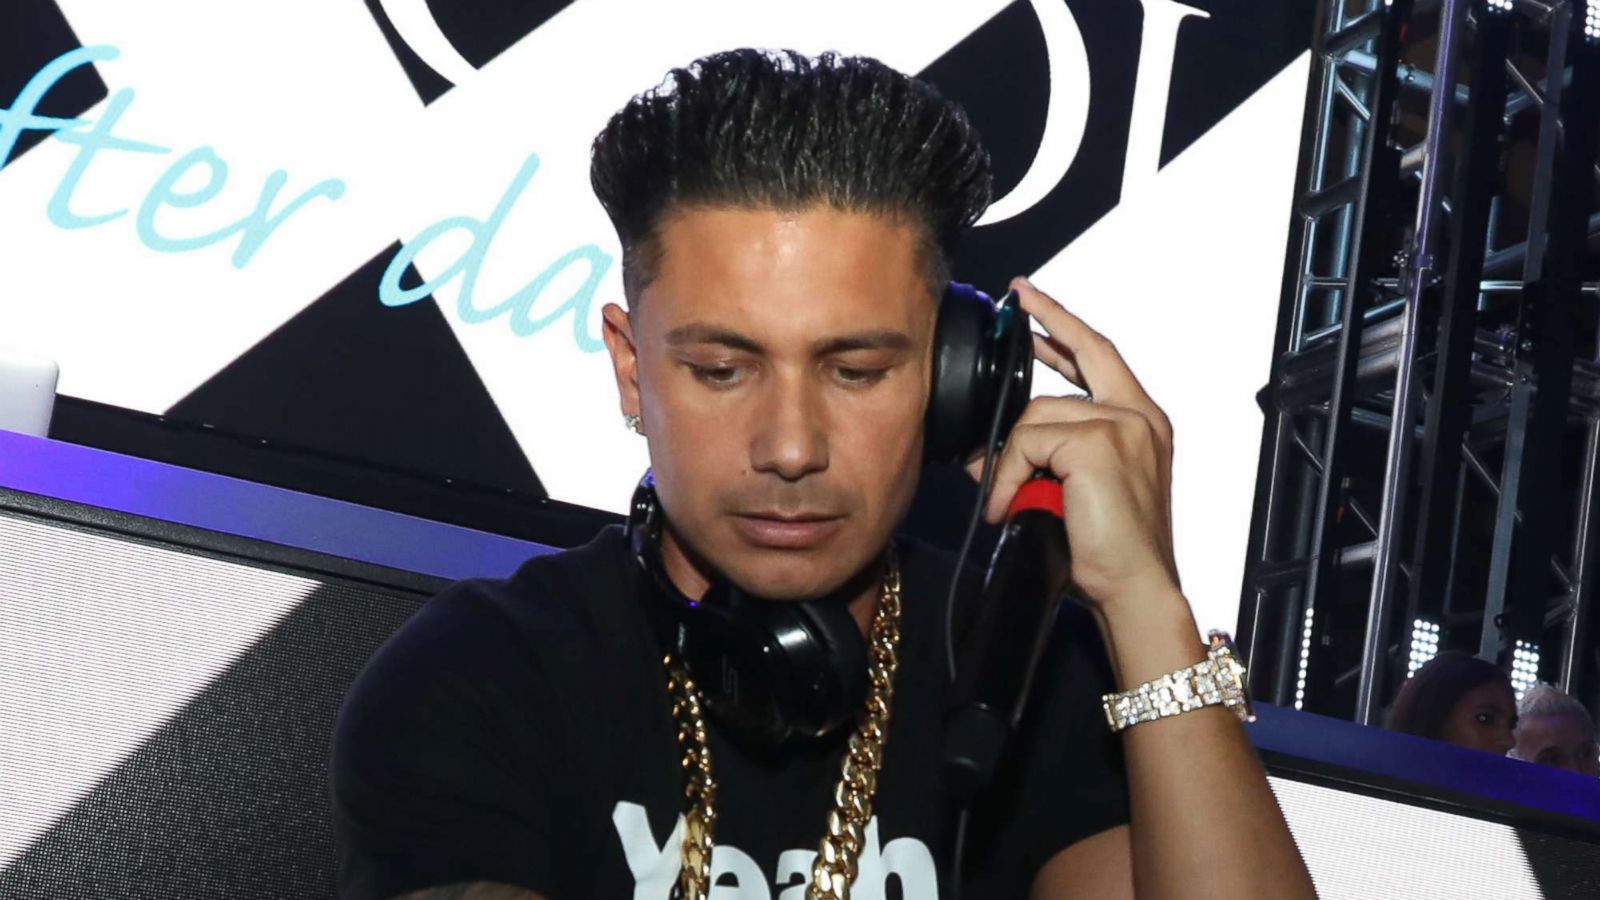 Jersey Shore' star DJ Pauly D shares his ultimate spring break playlist